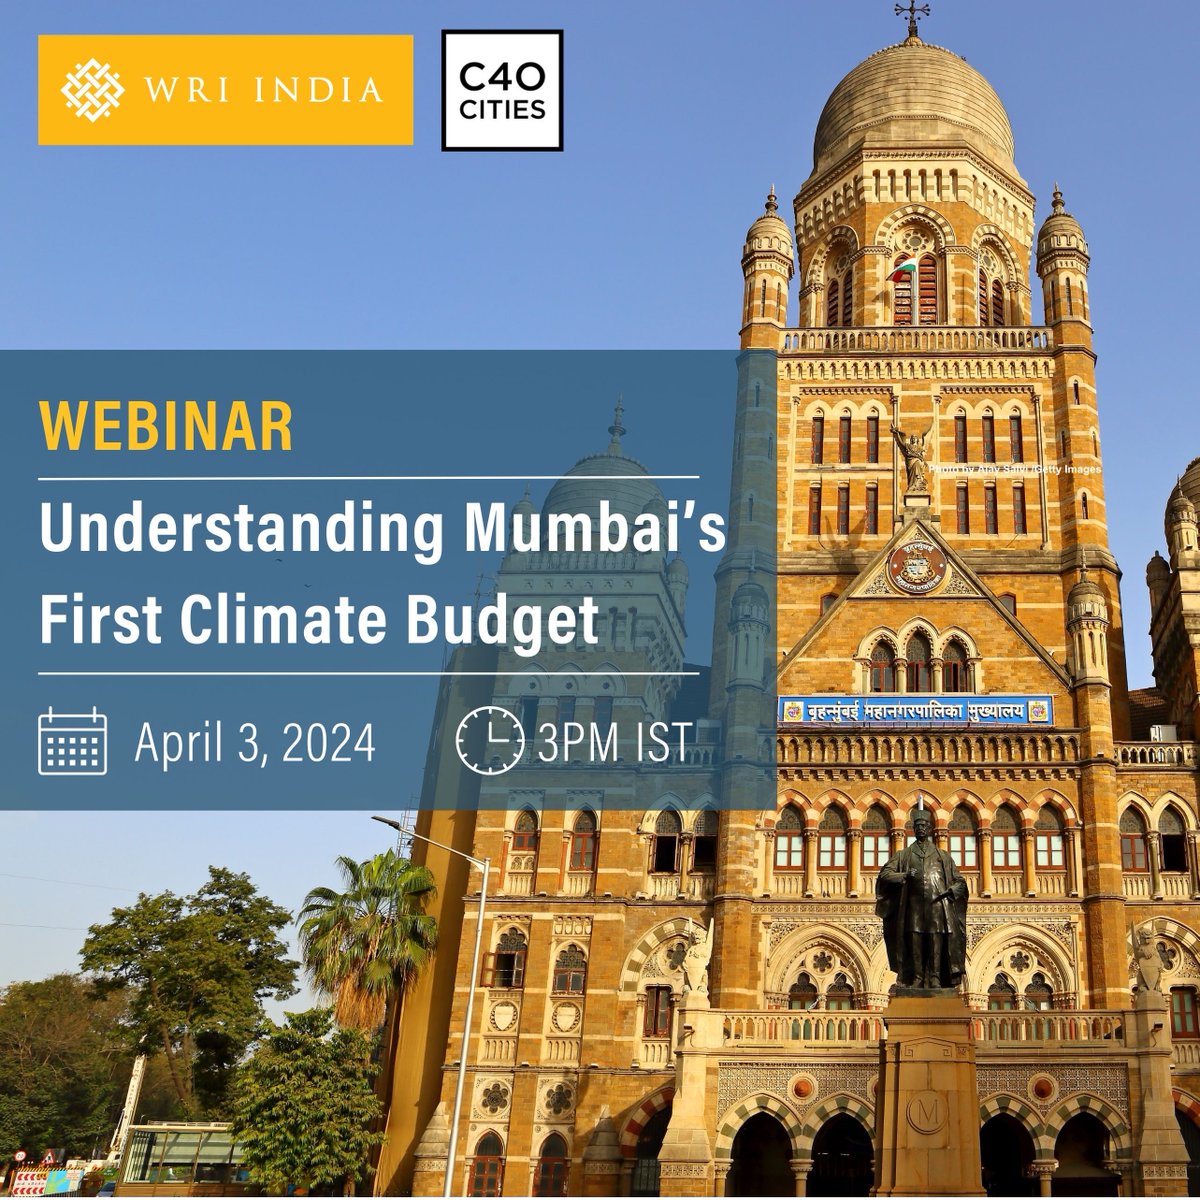 📢 Today at 3PM! Join us for our webinar on #Mumbai’s first ever #ClimateBudget, jointly organized by #WRIIndia and @C40Cities as knowledge partners for the #MumbaiClimateActionPlan (#MCAP) Register now! bit.ly/3VF3Dit